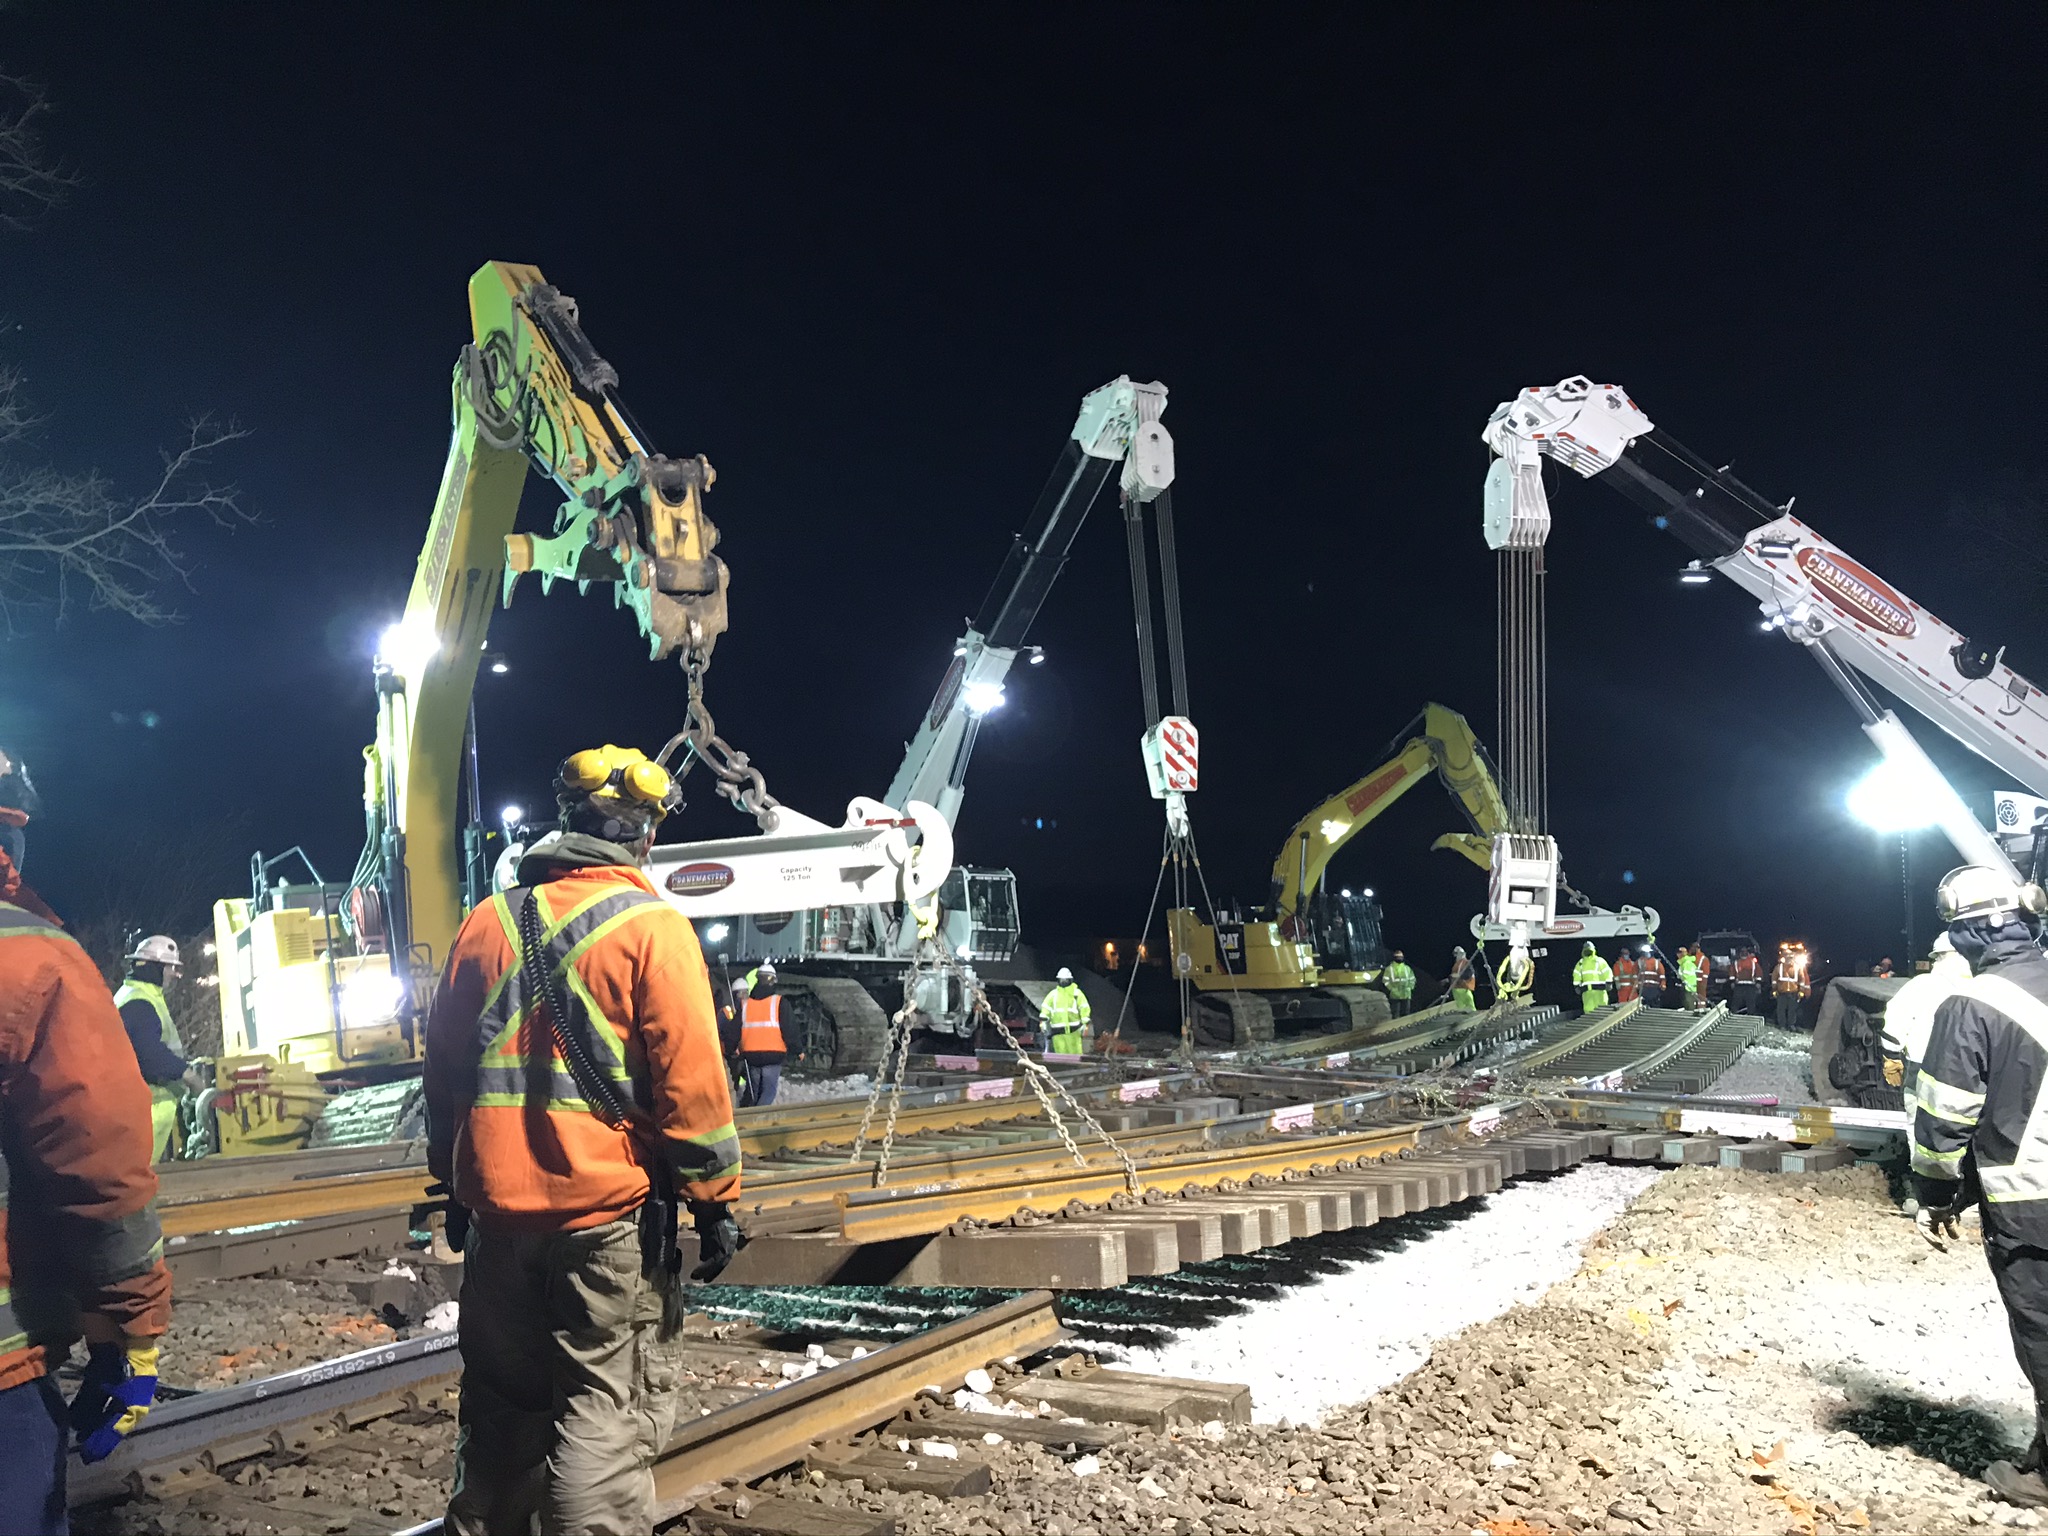 Four cranes place the new diamond on the roadbed as orange-vest clad crew members supervise.